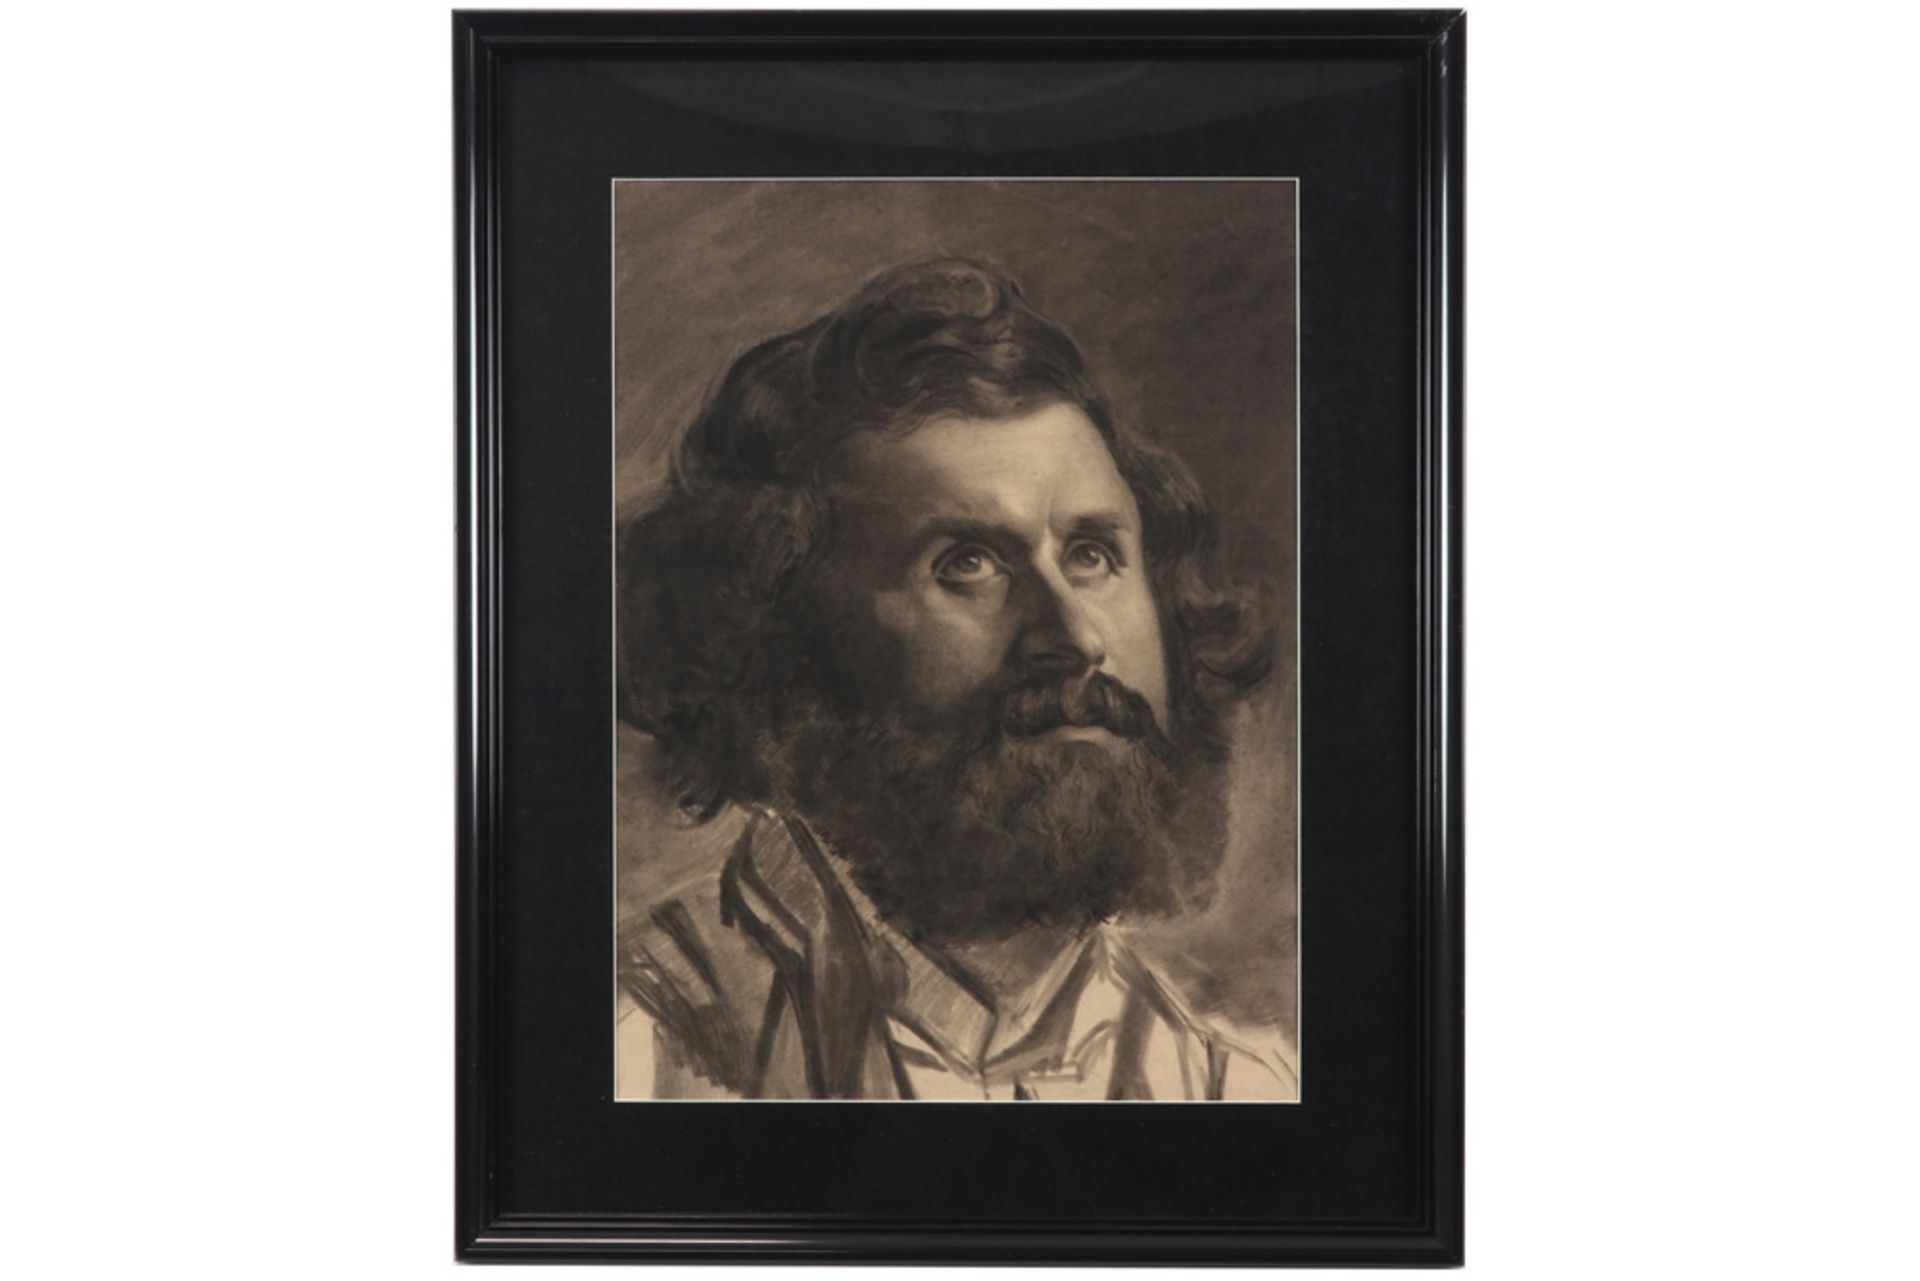 19th Cent. French mixed media (with charcoal) with a study of a bearded man, possibly a portrait - Image 2 of 2